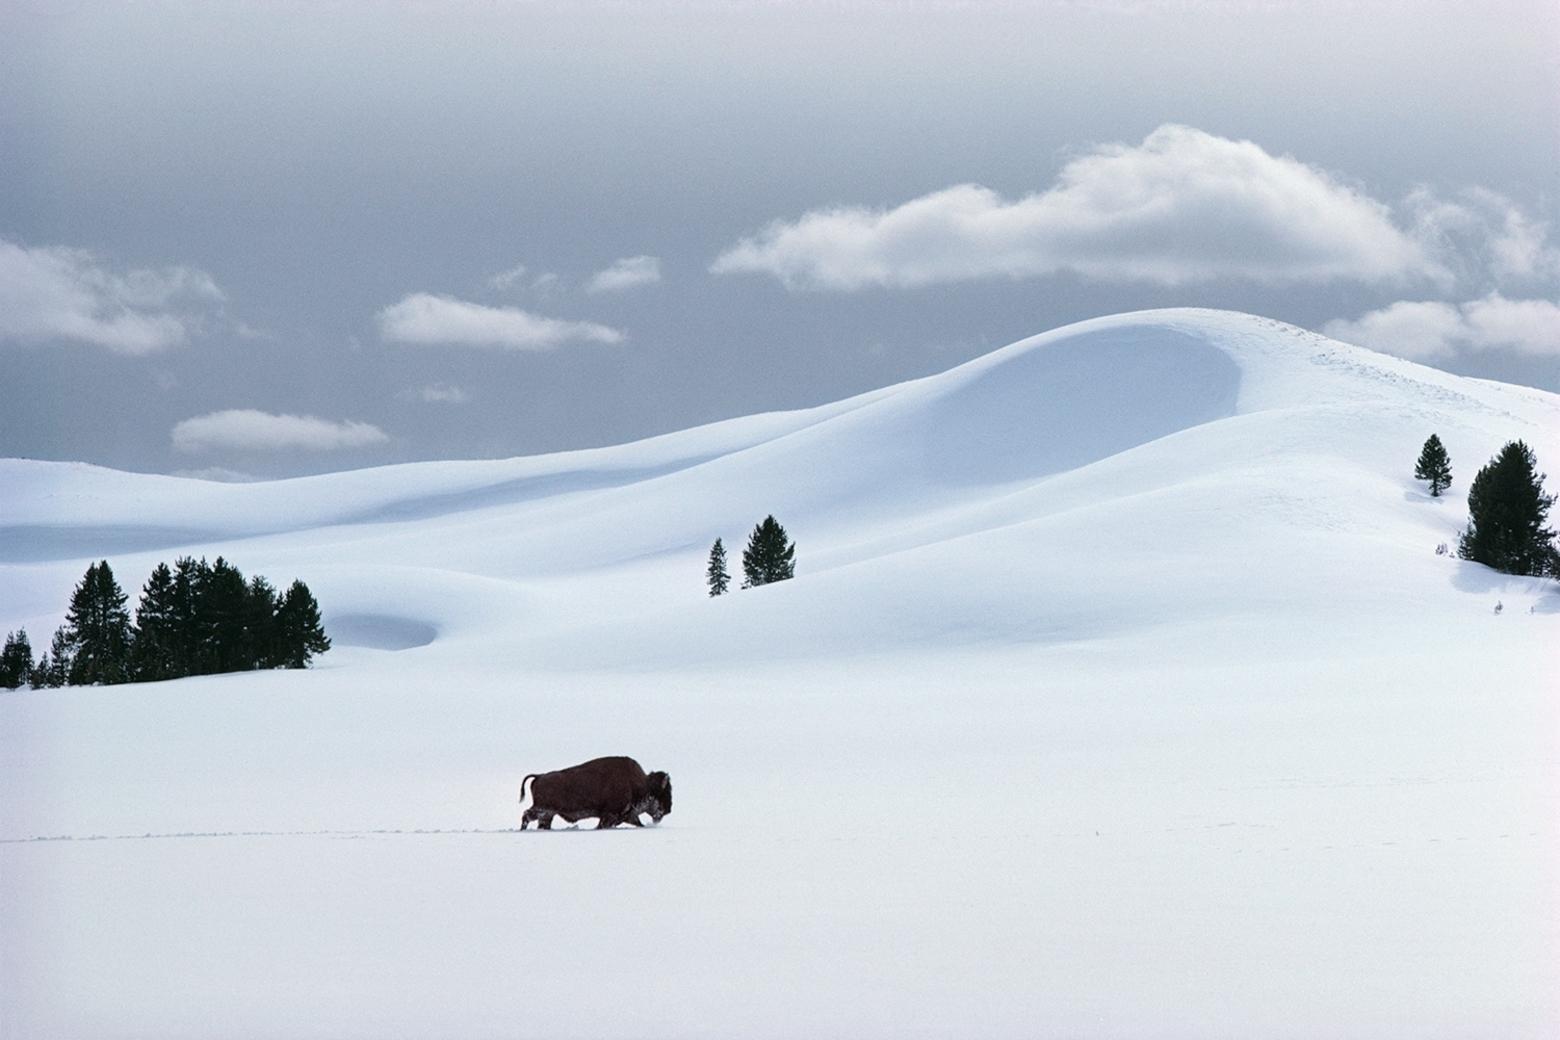 "I have long thought of Yellowstone in winter as an albino desert of snow dunes where much of the water is locked up in crystalline solids," Fuller observes. "In Yellowstone, as in Namibia, the landscape is often animated by large spectacular animals. Here a bull bison makes his way across the mid-winter snowscape, a harsh environment of deep cold and deep snow but one in which he is at home."